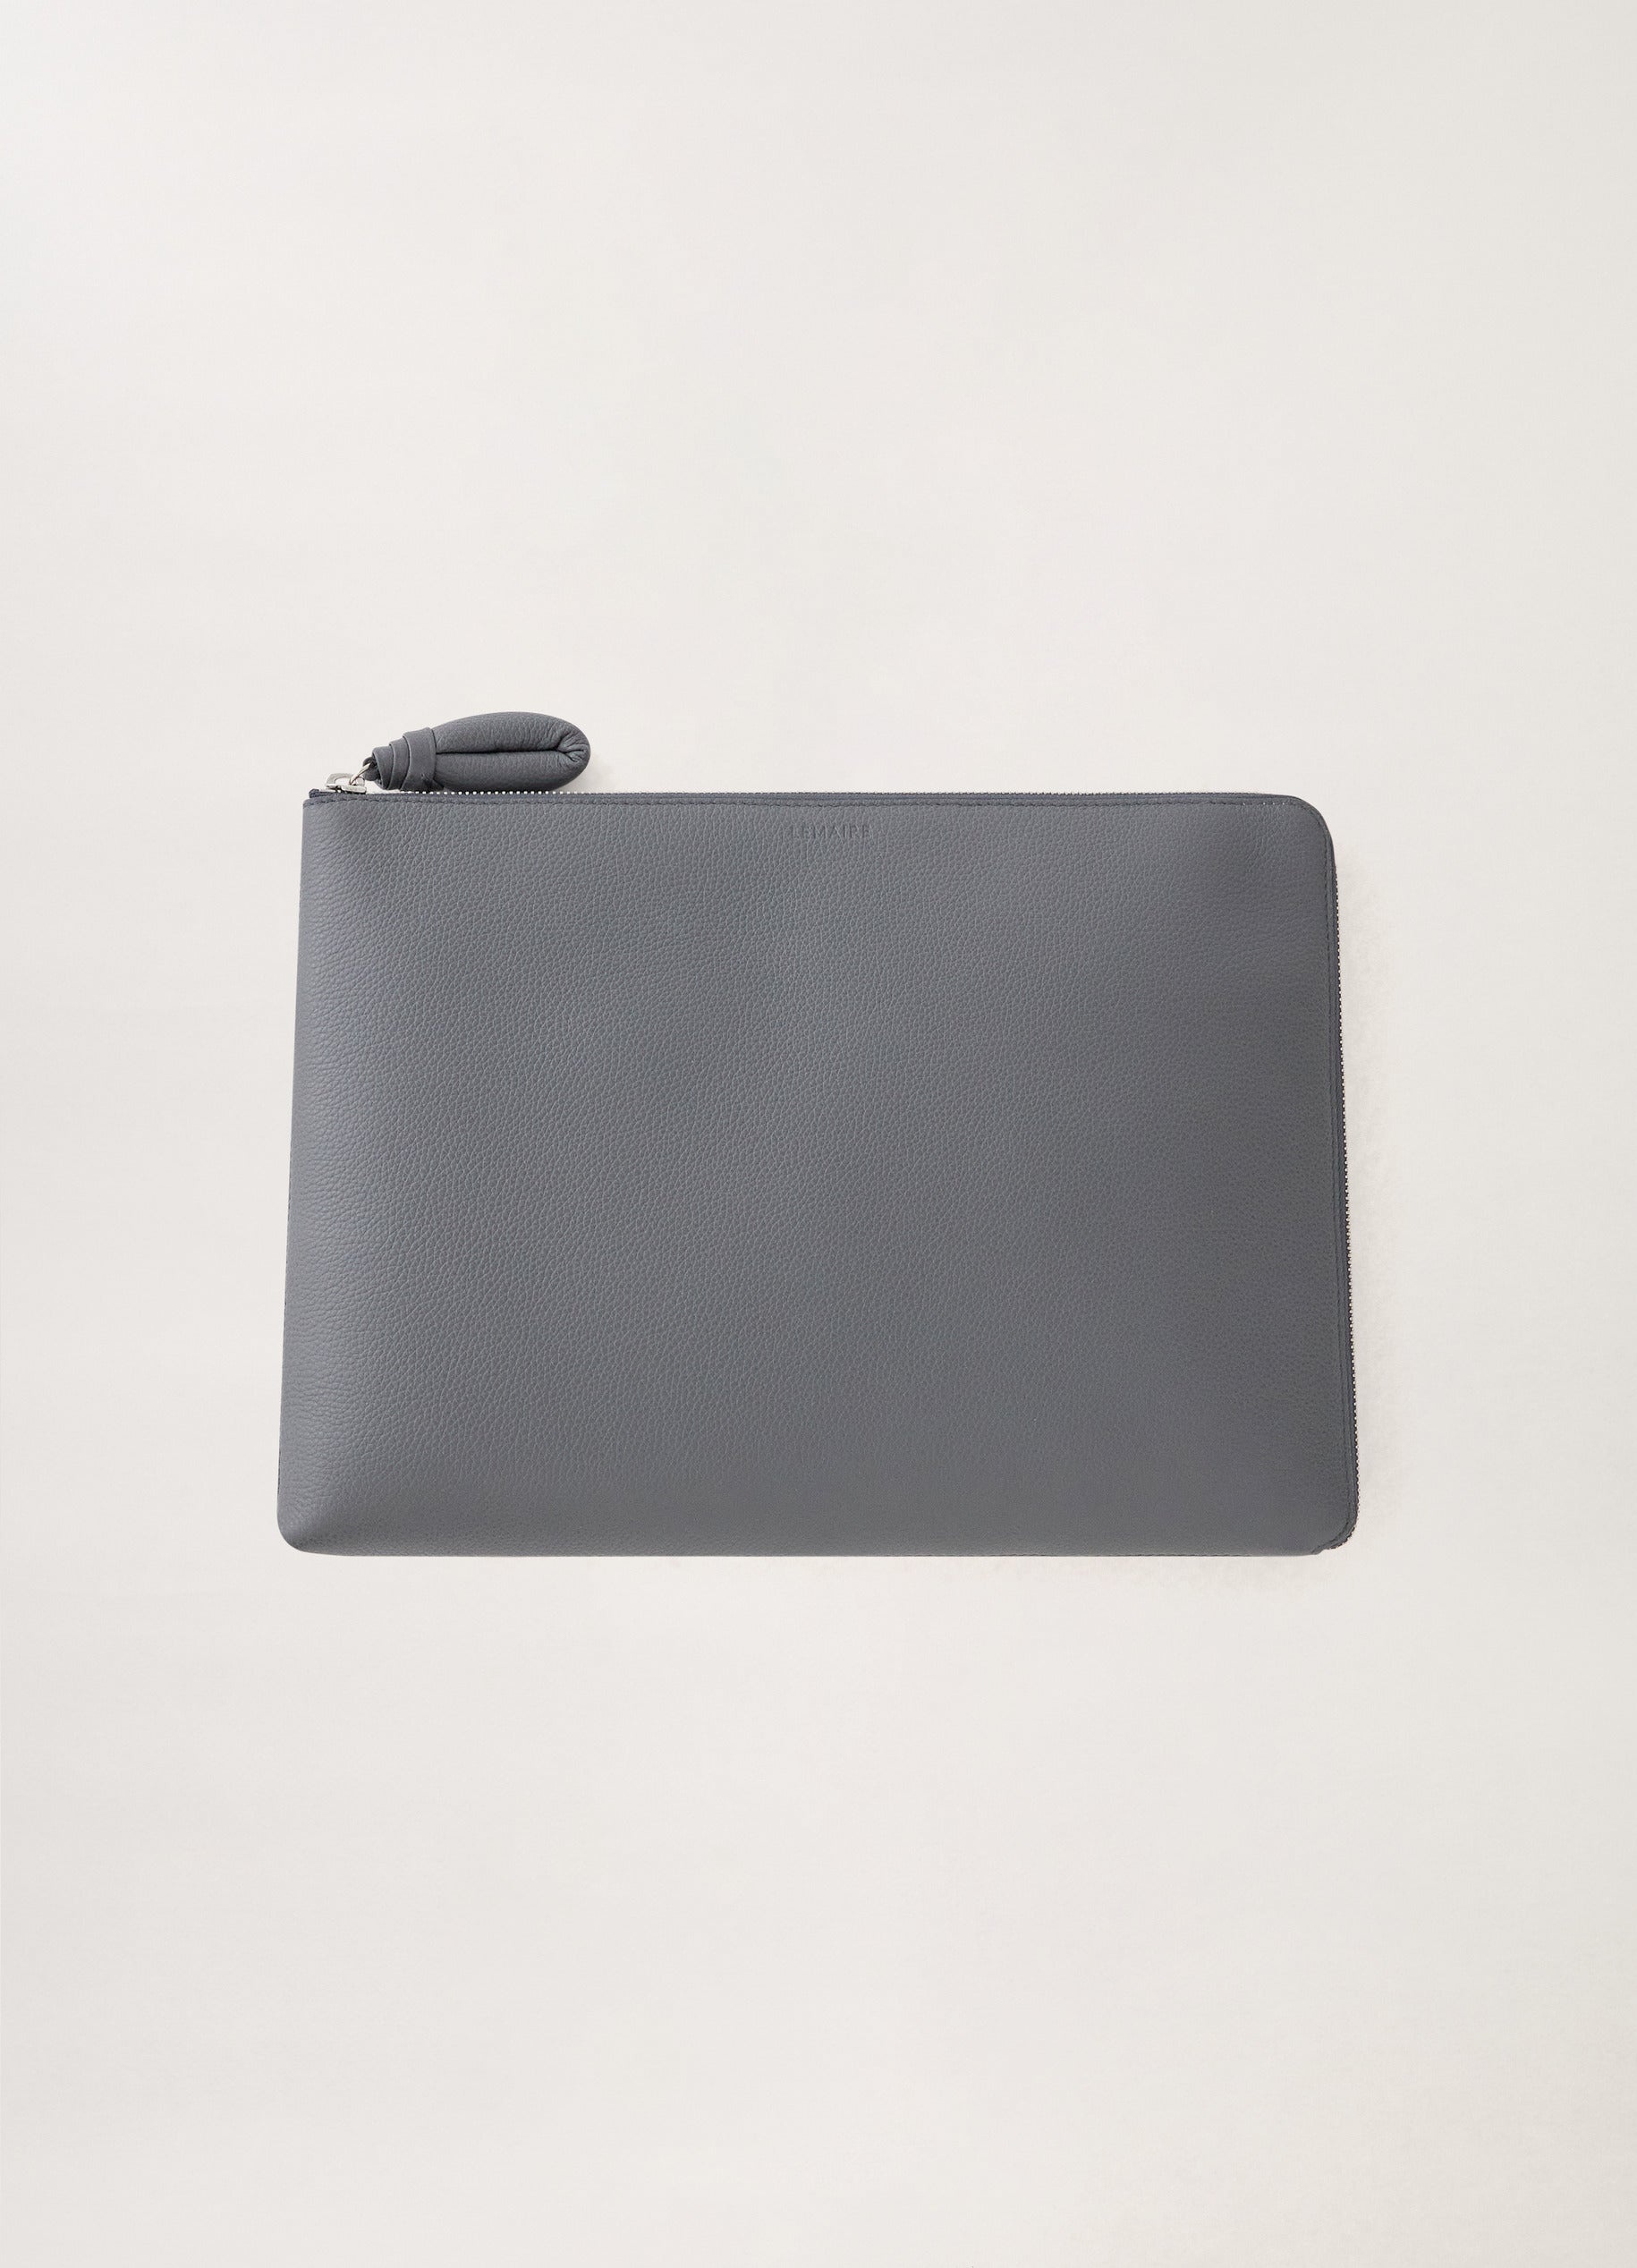 DOCUMENT HOLDER
SOFT GRAINED LEATHER - 1